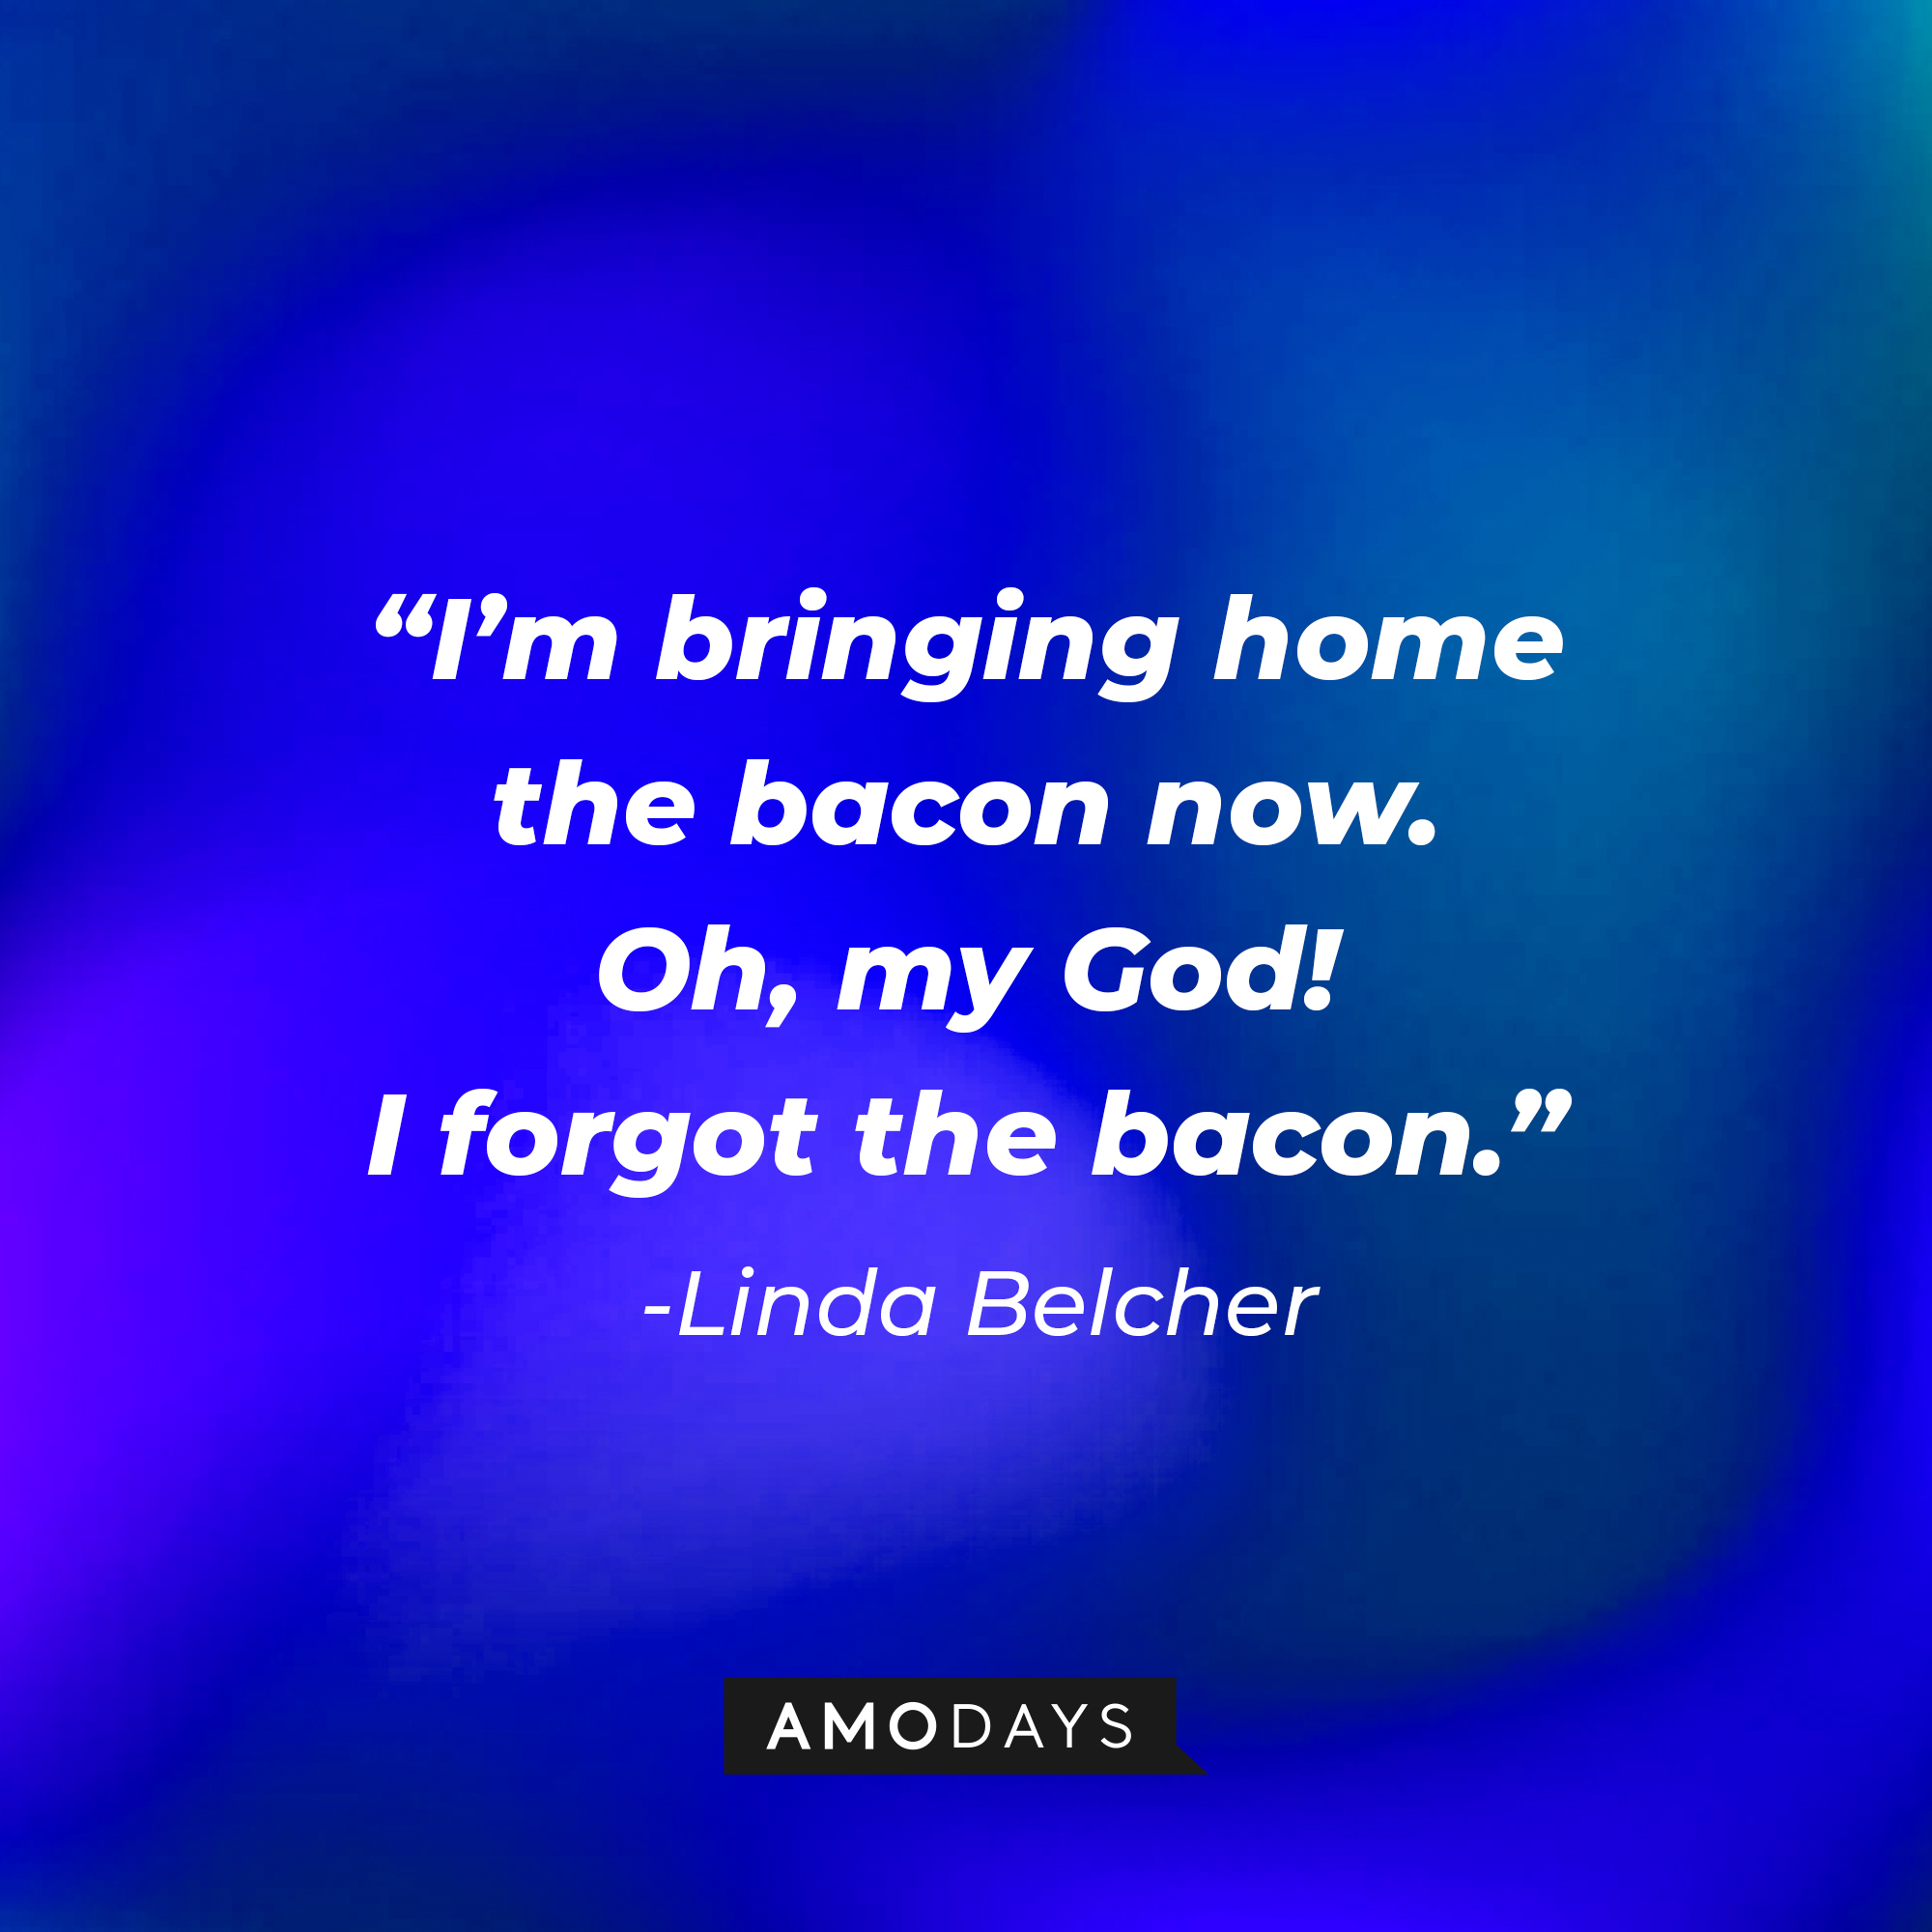 Linda Belcher’s quote: “I’m bringing home the bacon now. Oh, my God! I forgot the bacon.”   | Source: AmoDays